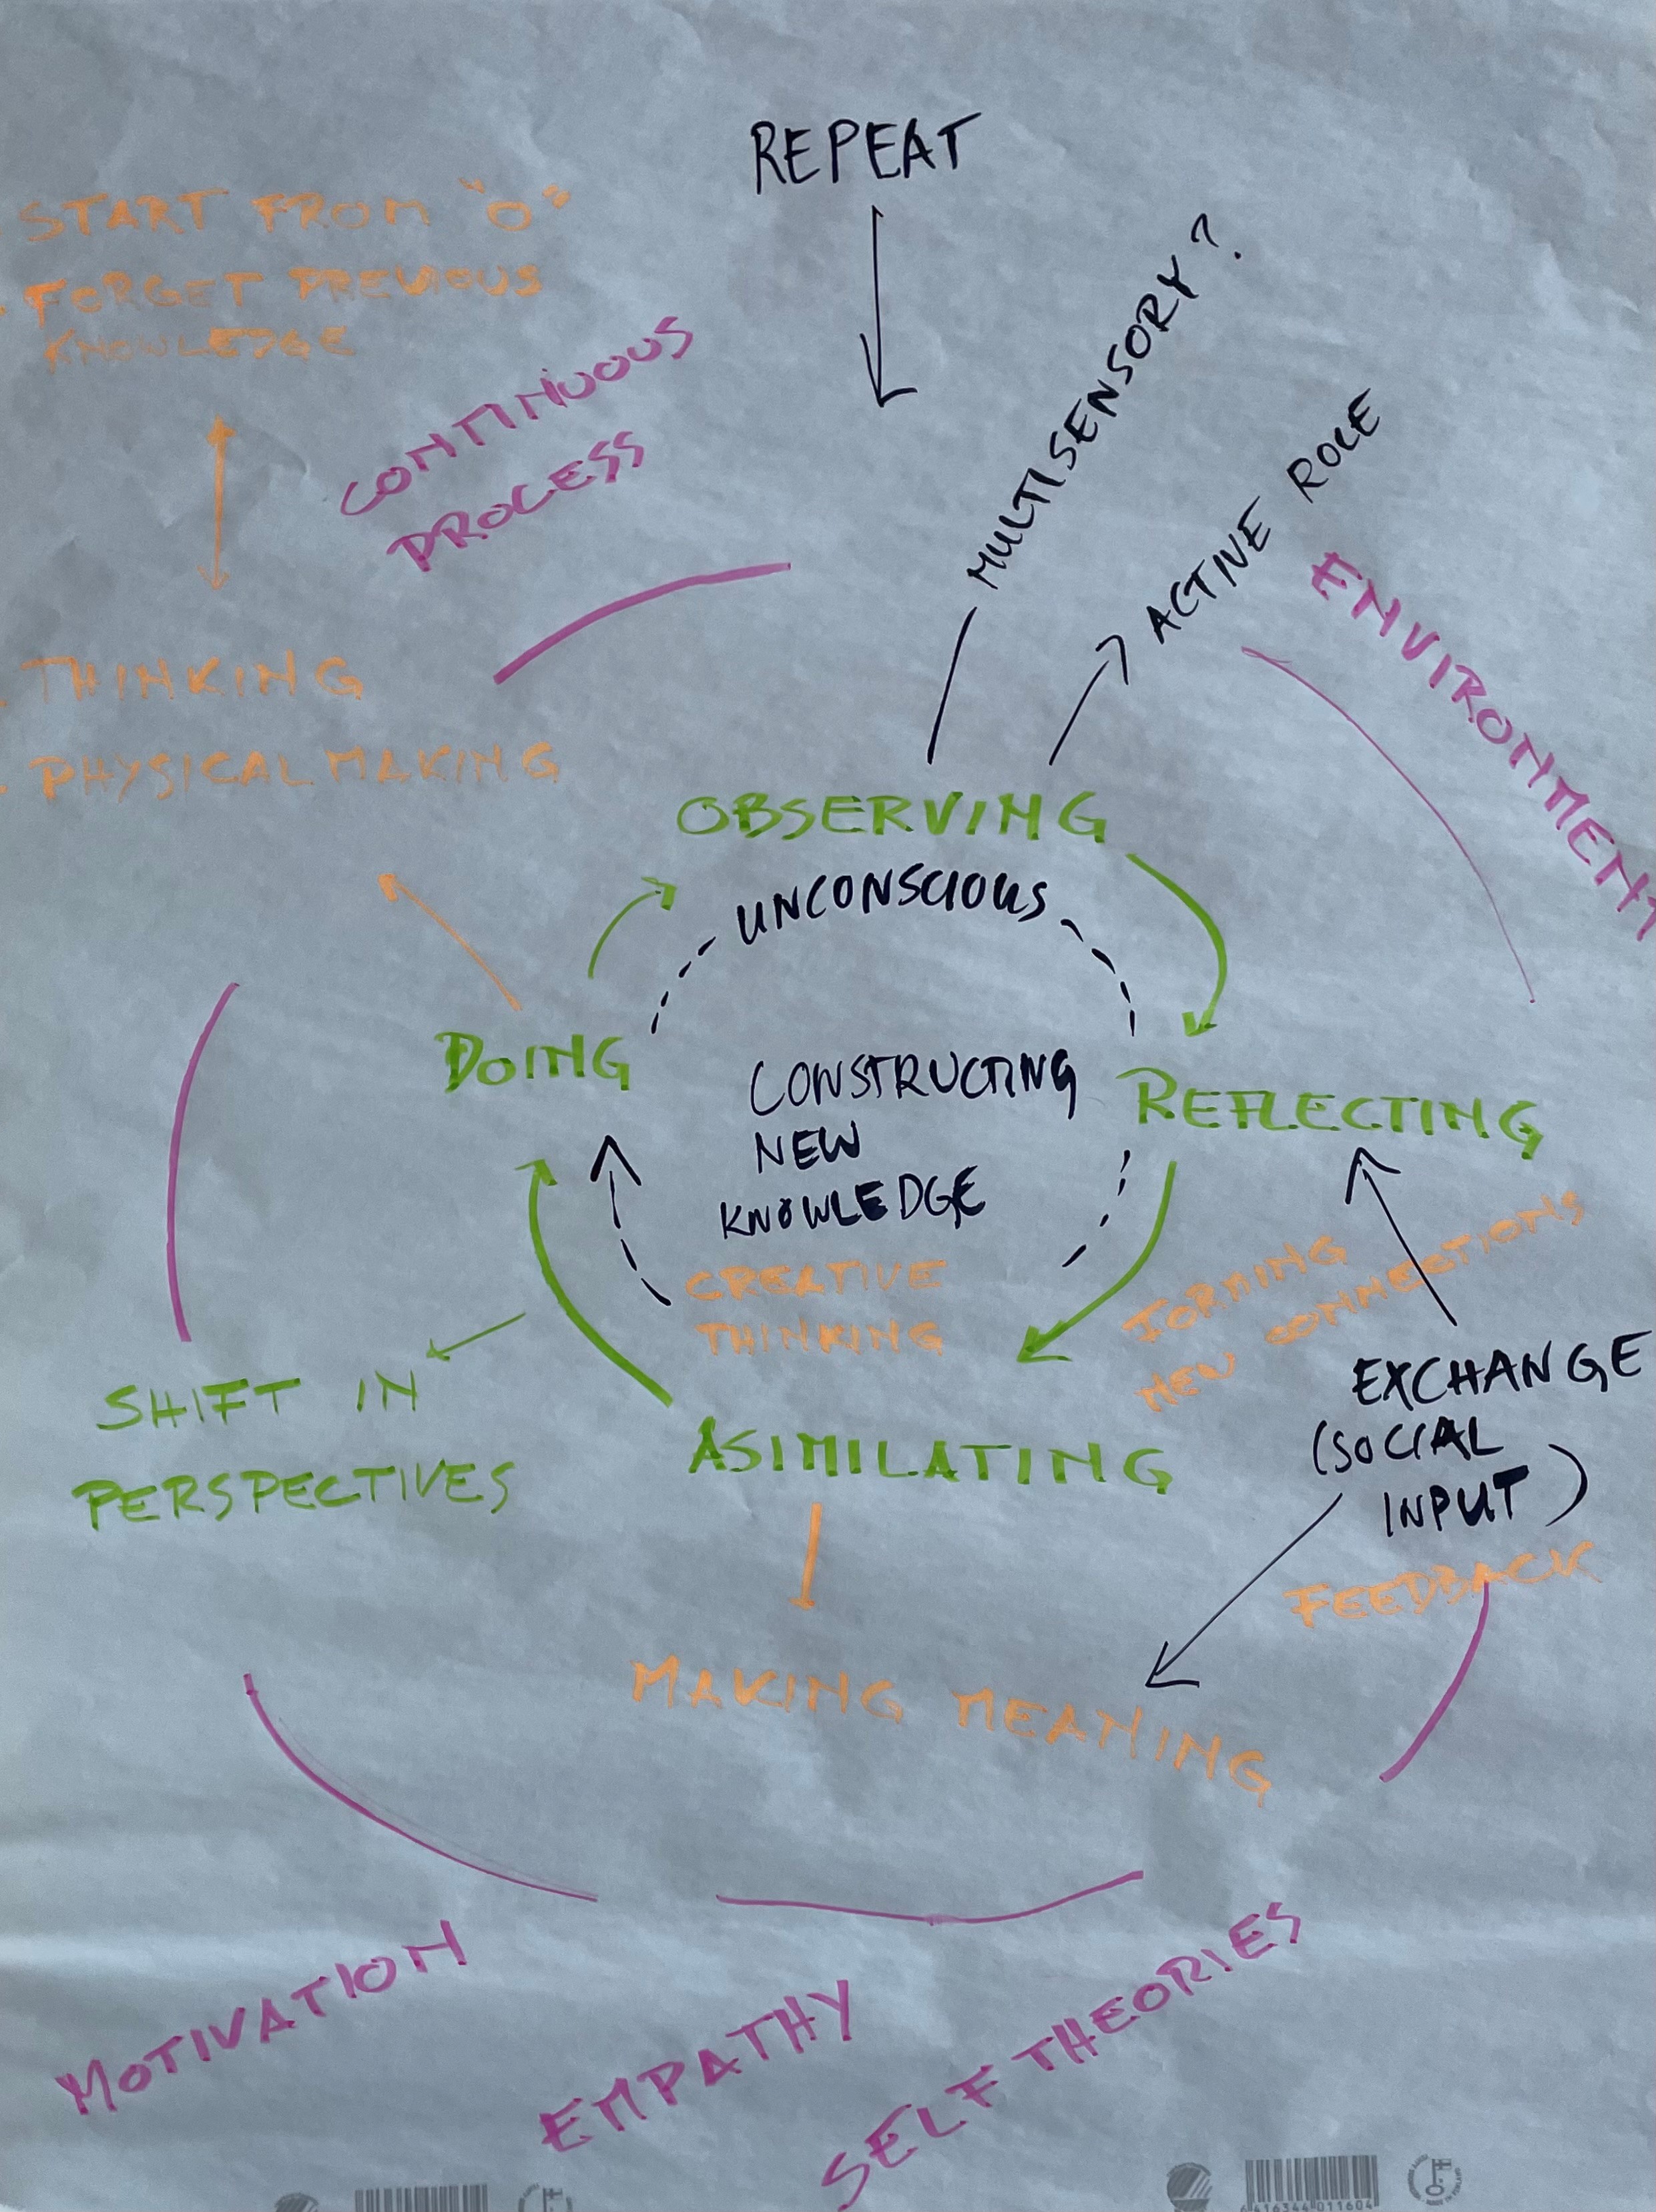 Snowball method group work (1) in mind-map form. Topic: What is learning?